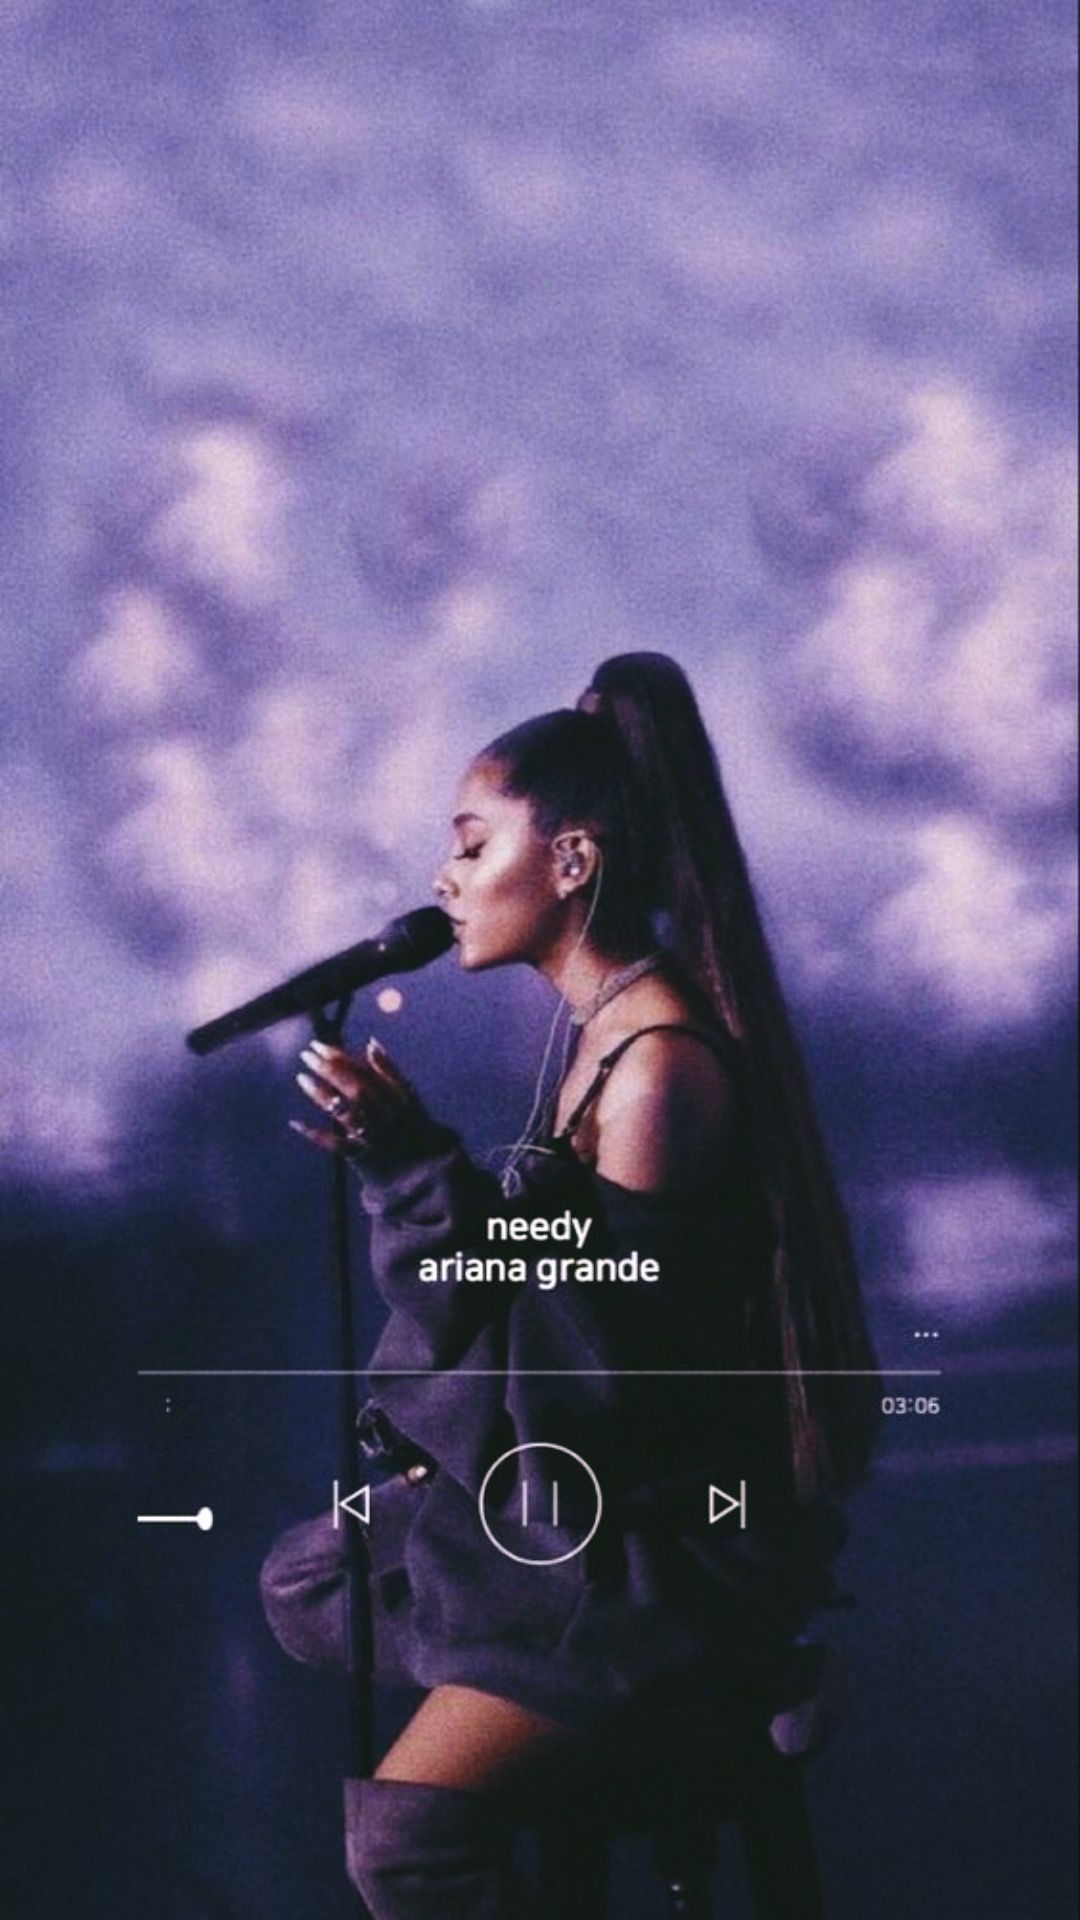 Ariana Grande wallpaper for phone with high-resolution 1080x1920 pixel. You can use this wallpaper for your iPhone 5, 6, 7, 8, X, XS, XR backgrounds, Mobile Screensaver, or iPad Lock Screen - Ariana Grande